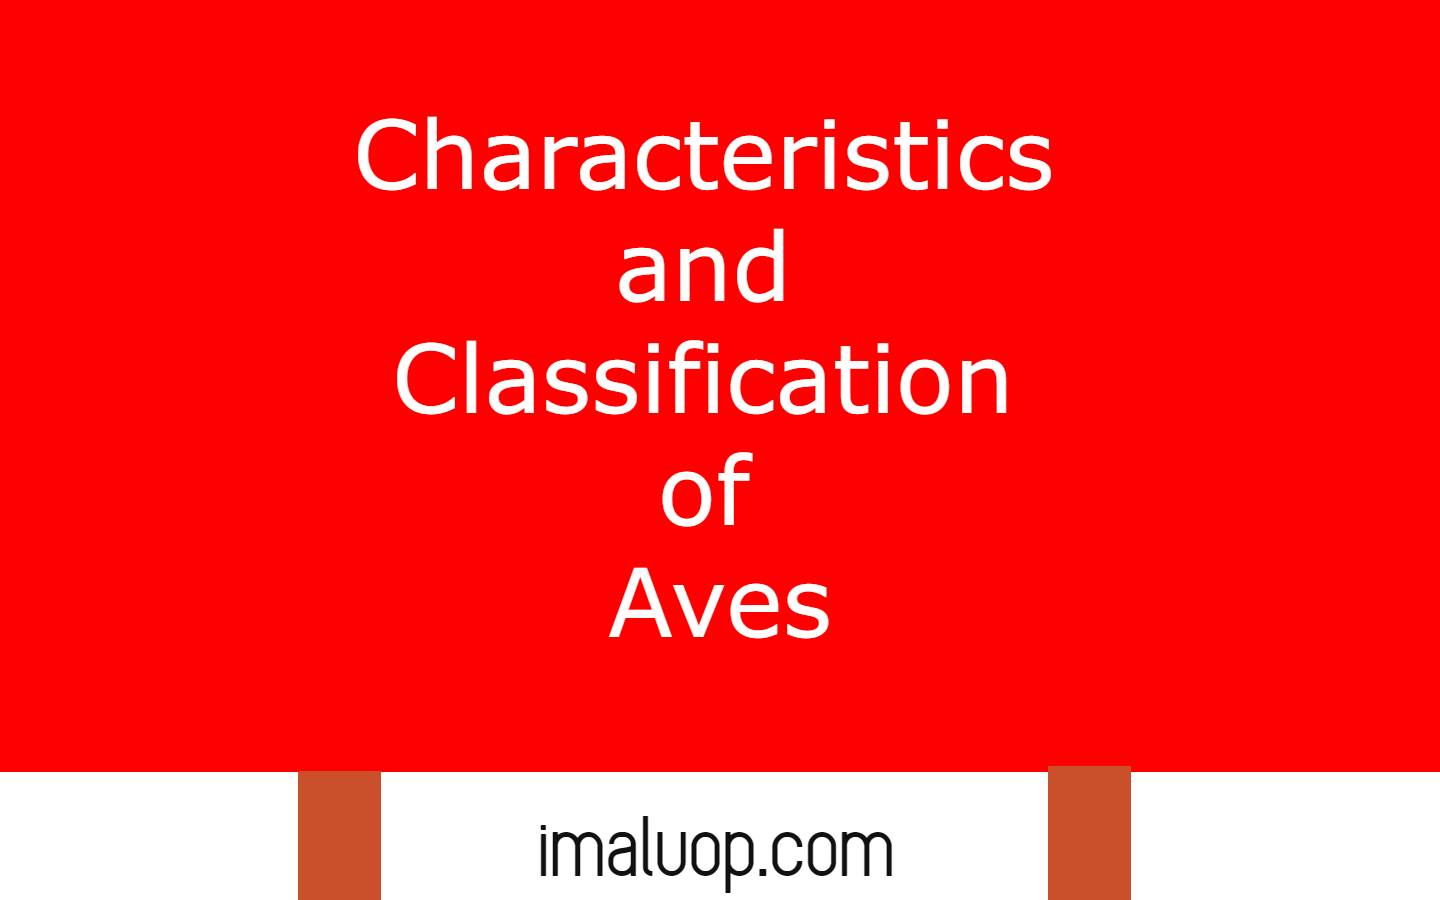 Characteristics and Classification of Aves